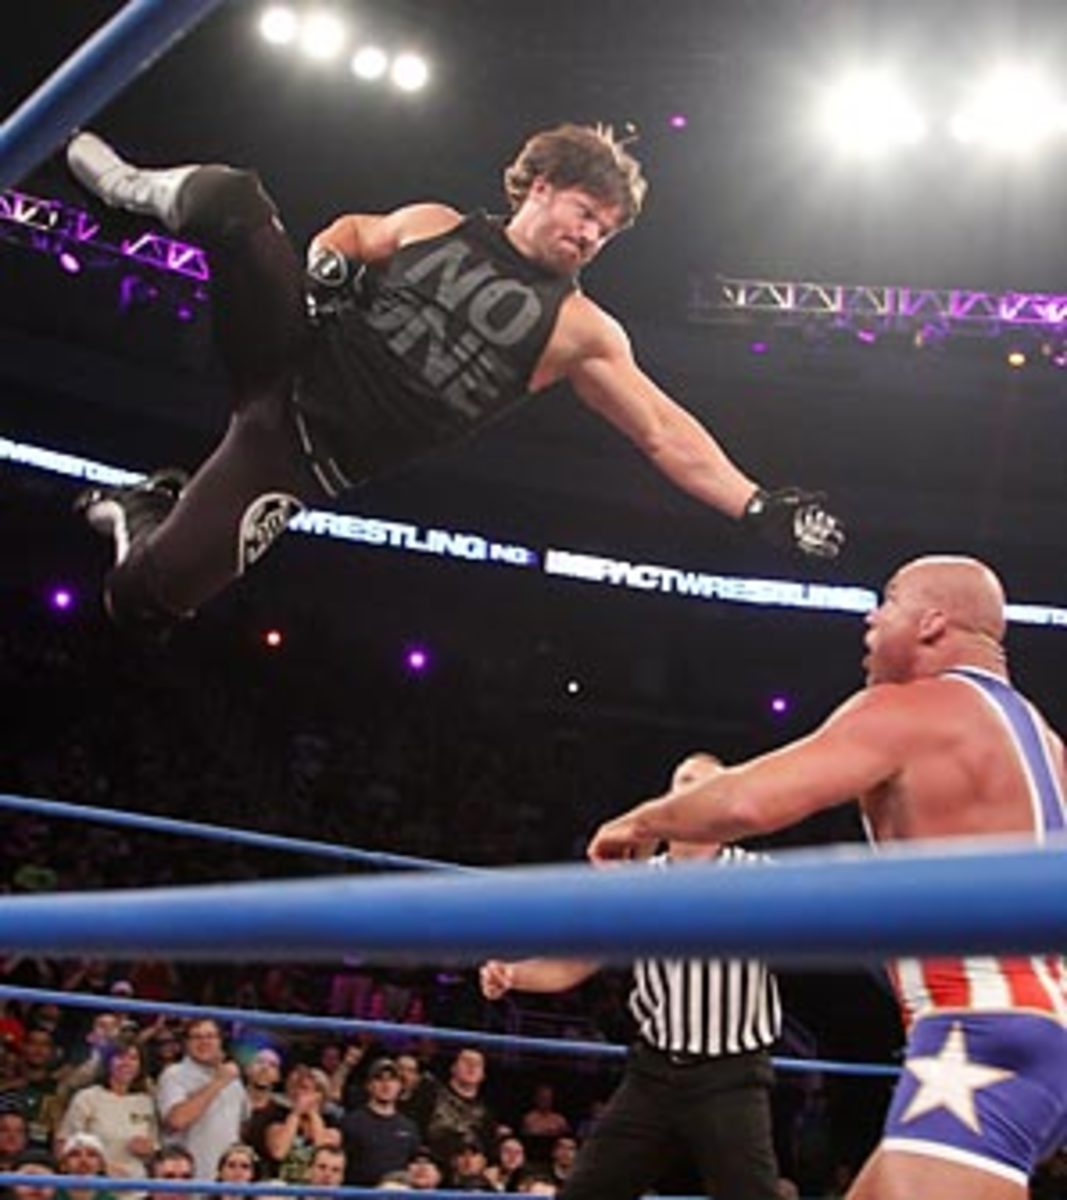 TNA World Champion A. J. Styles is known for his acrobatic performances; here with Kurt Angle.